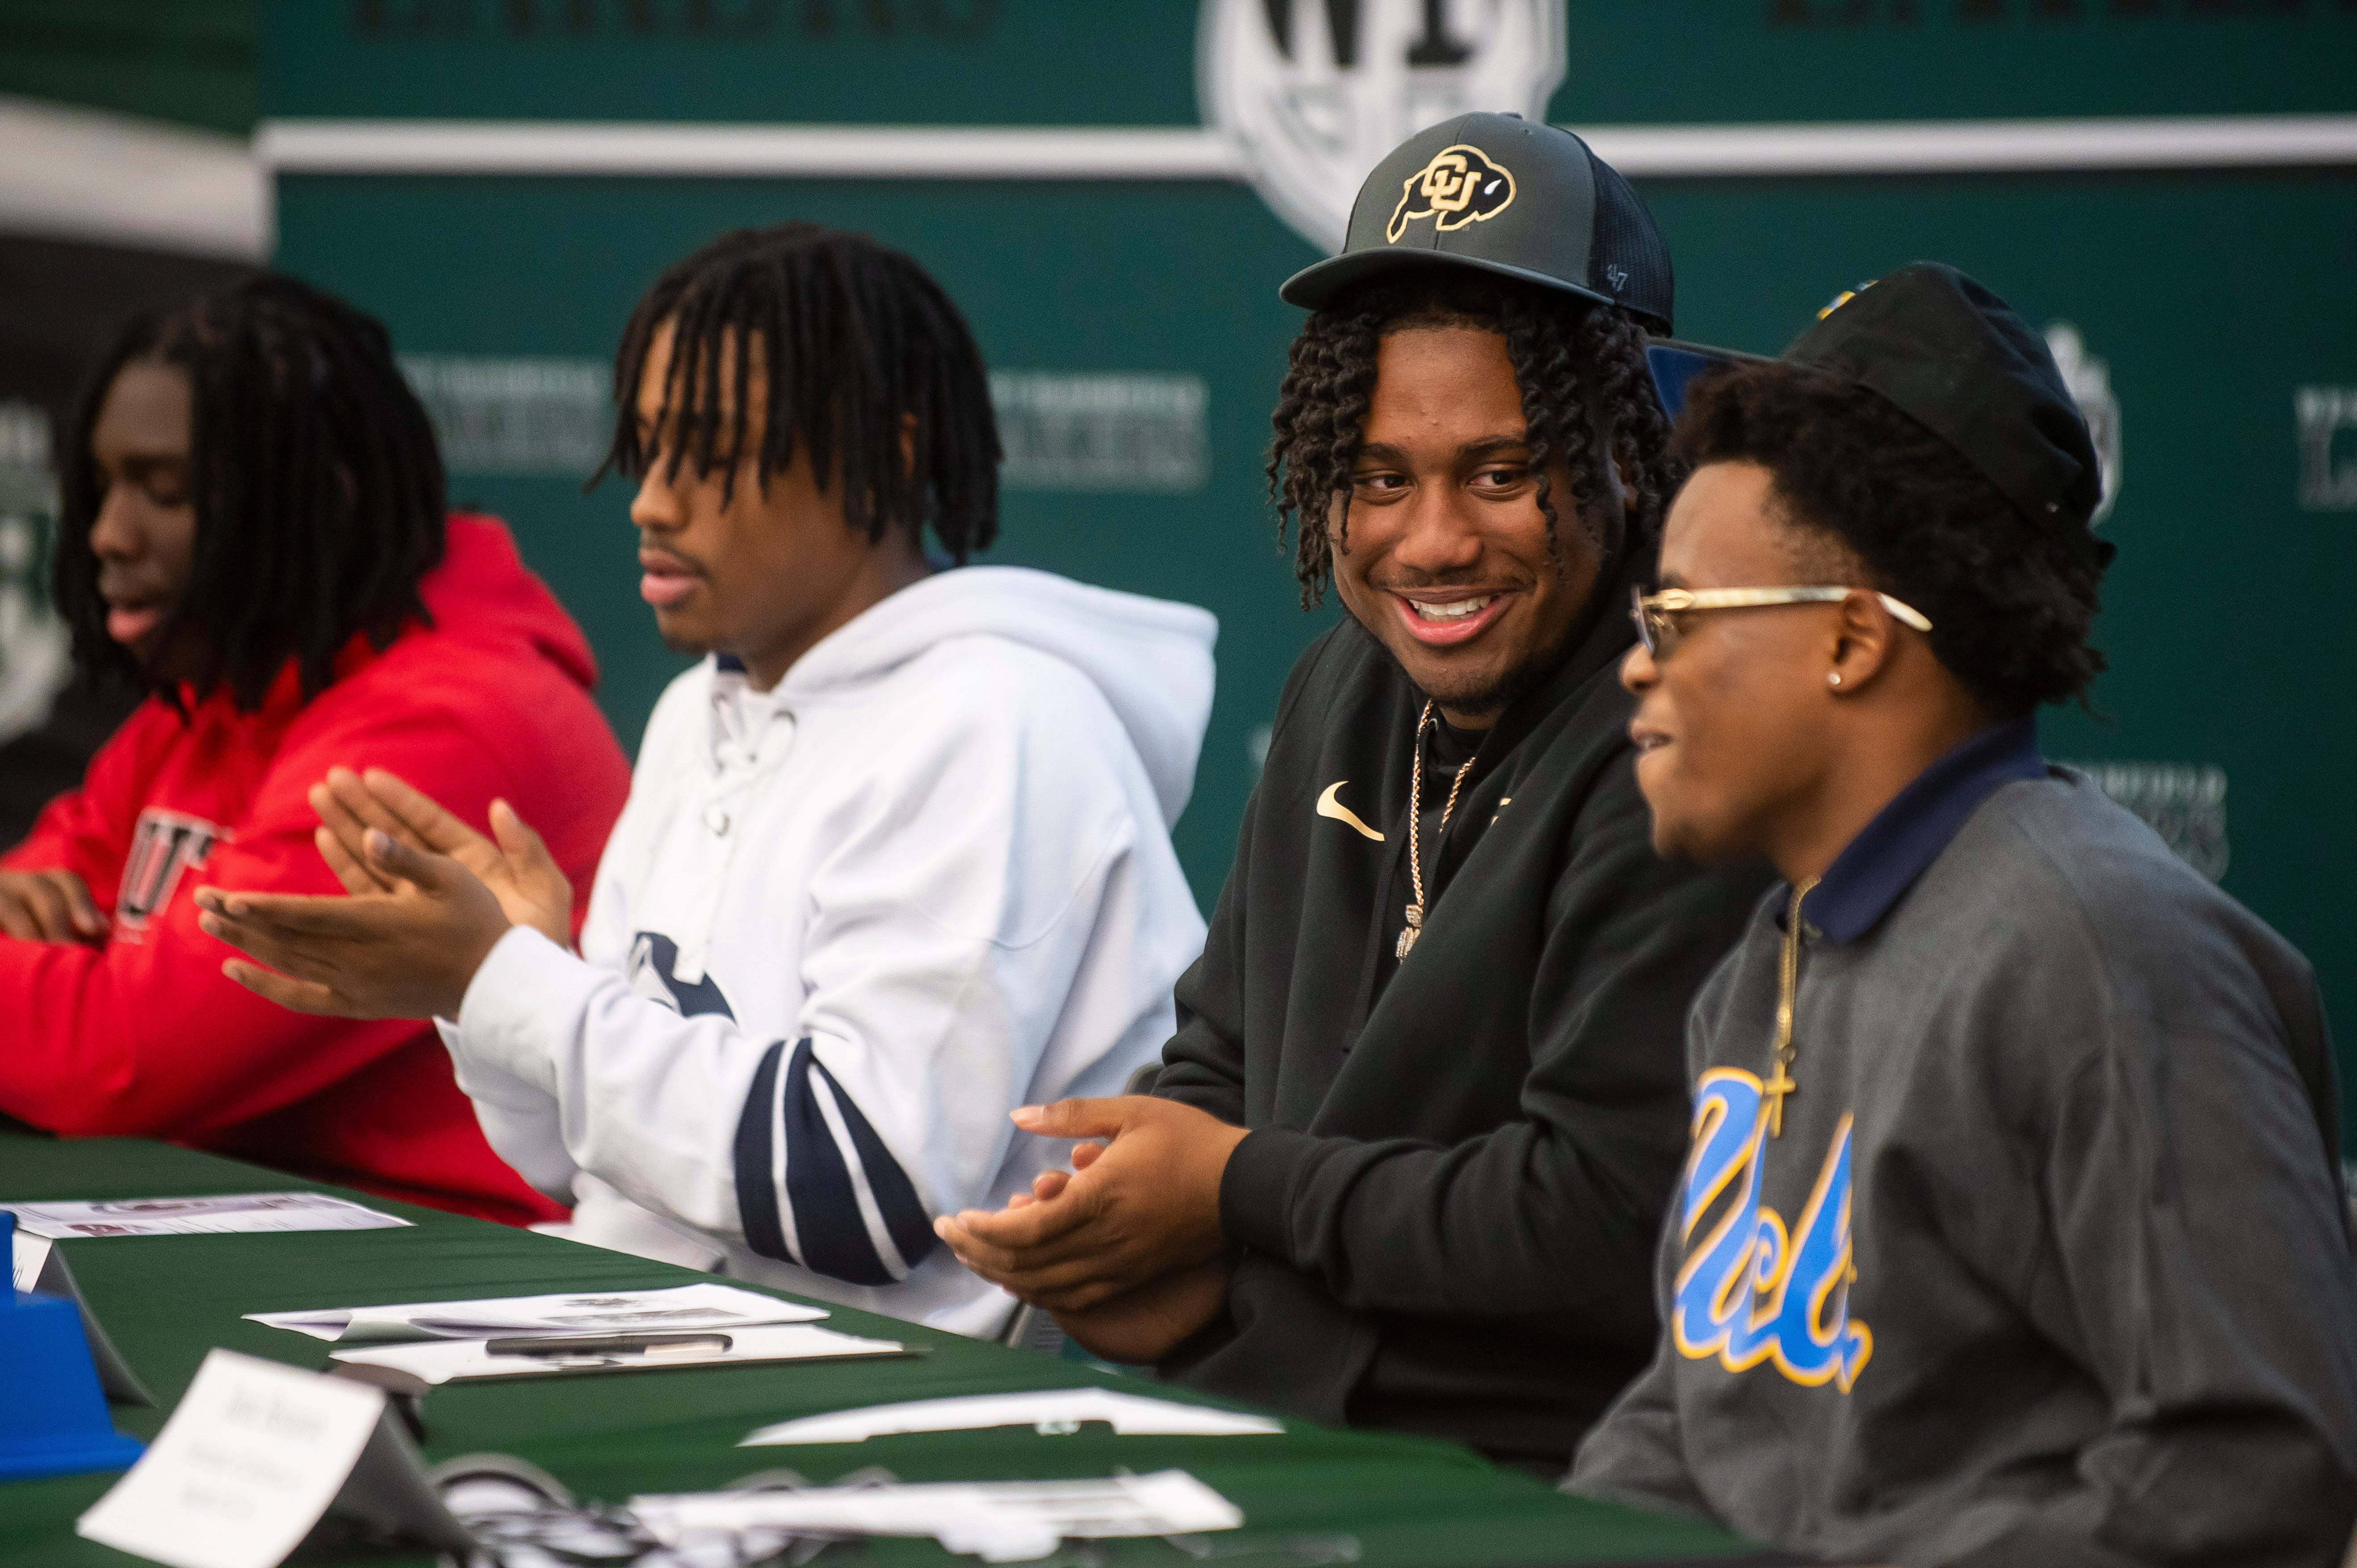 From left, West Bloomfield High School varsiy football players Montele Johnson II, Kari Jackson, Brandon Davis Swain and Jamir Benjamin applaud during a ceremony celebrating each of them signing letters of intent to play football at four different universities on Wednesday.